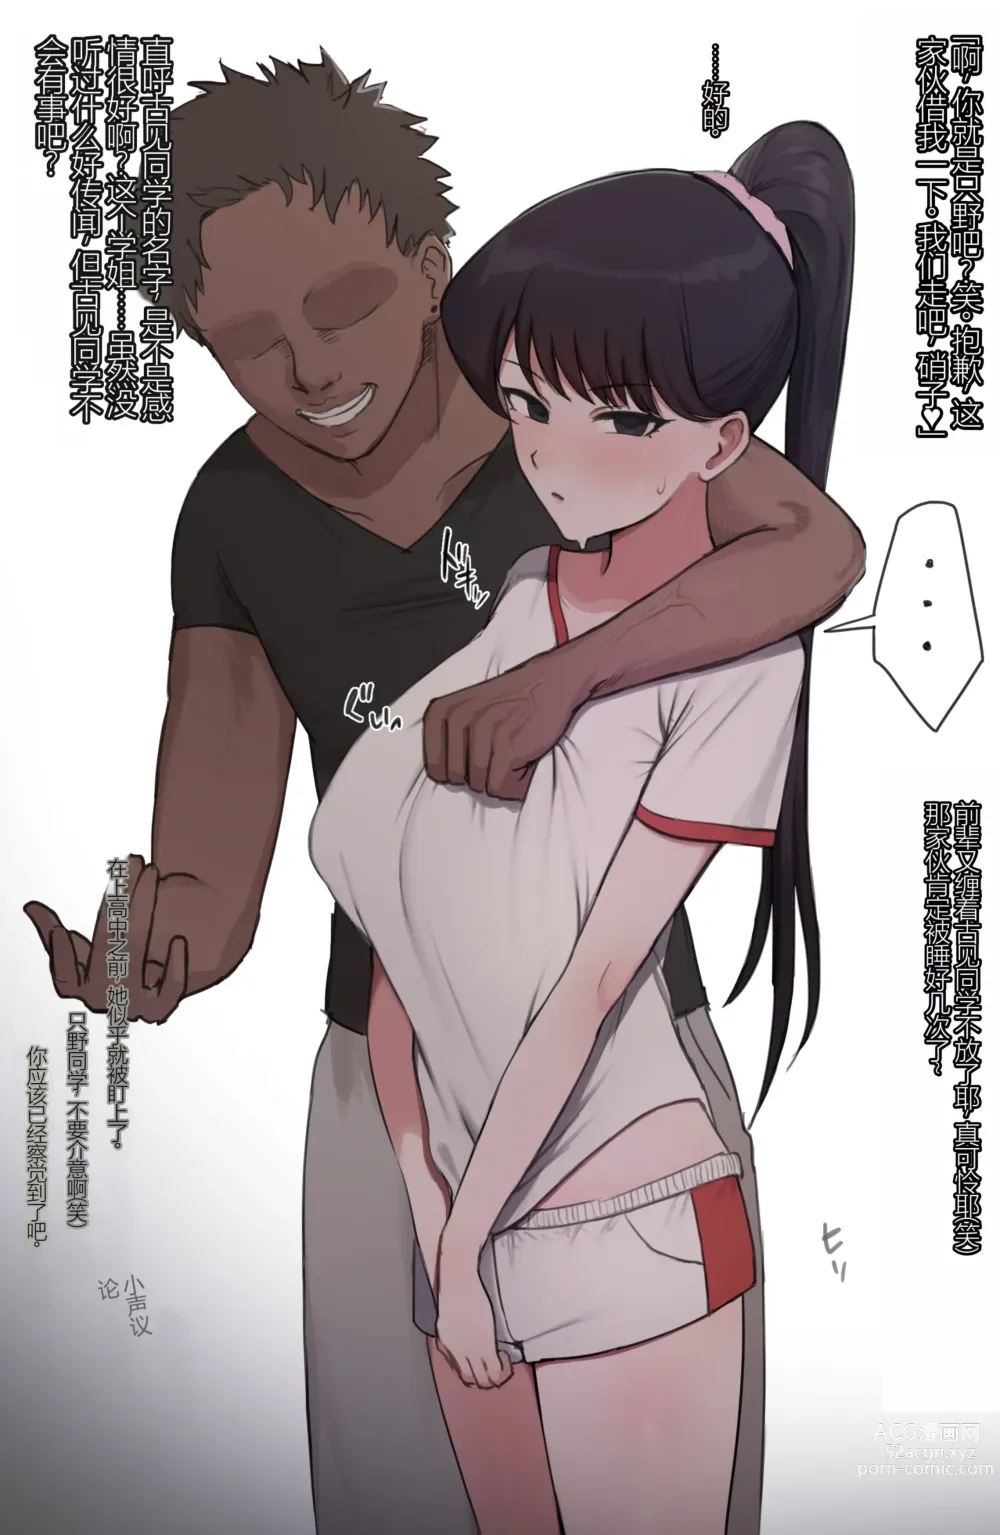 Page 1 of doujinshi 古见硝子的体育仓库寝取